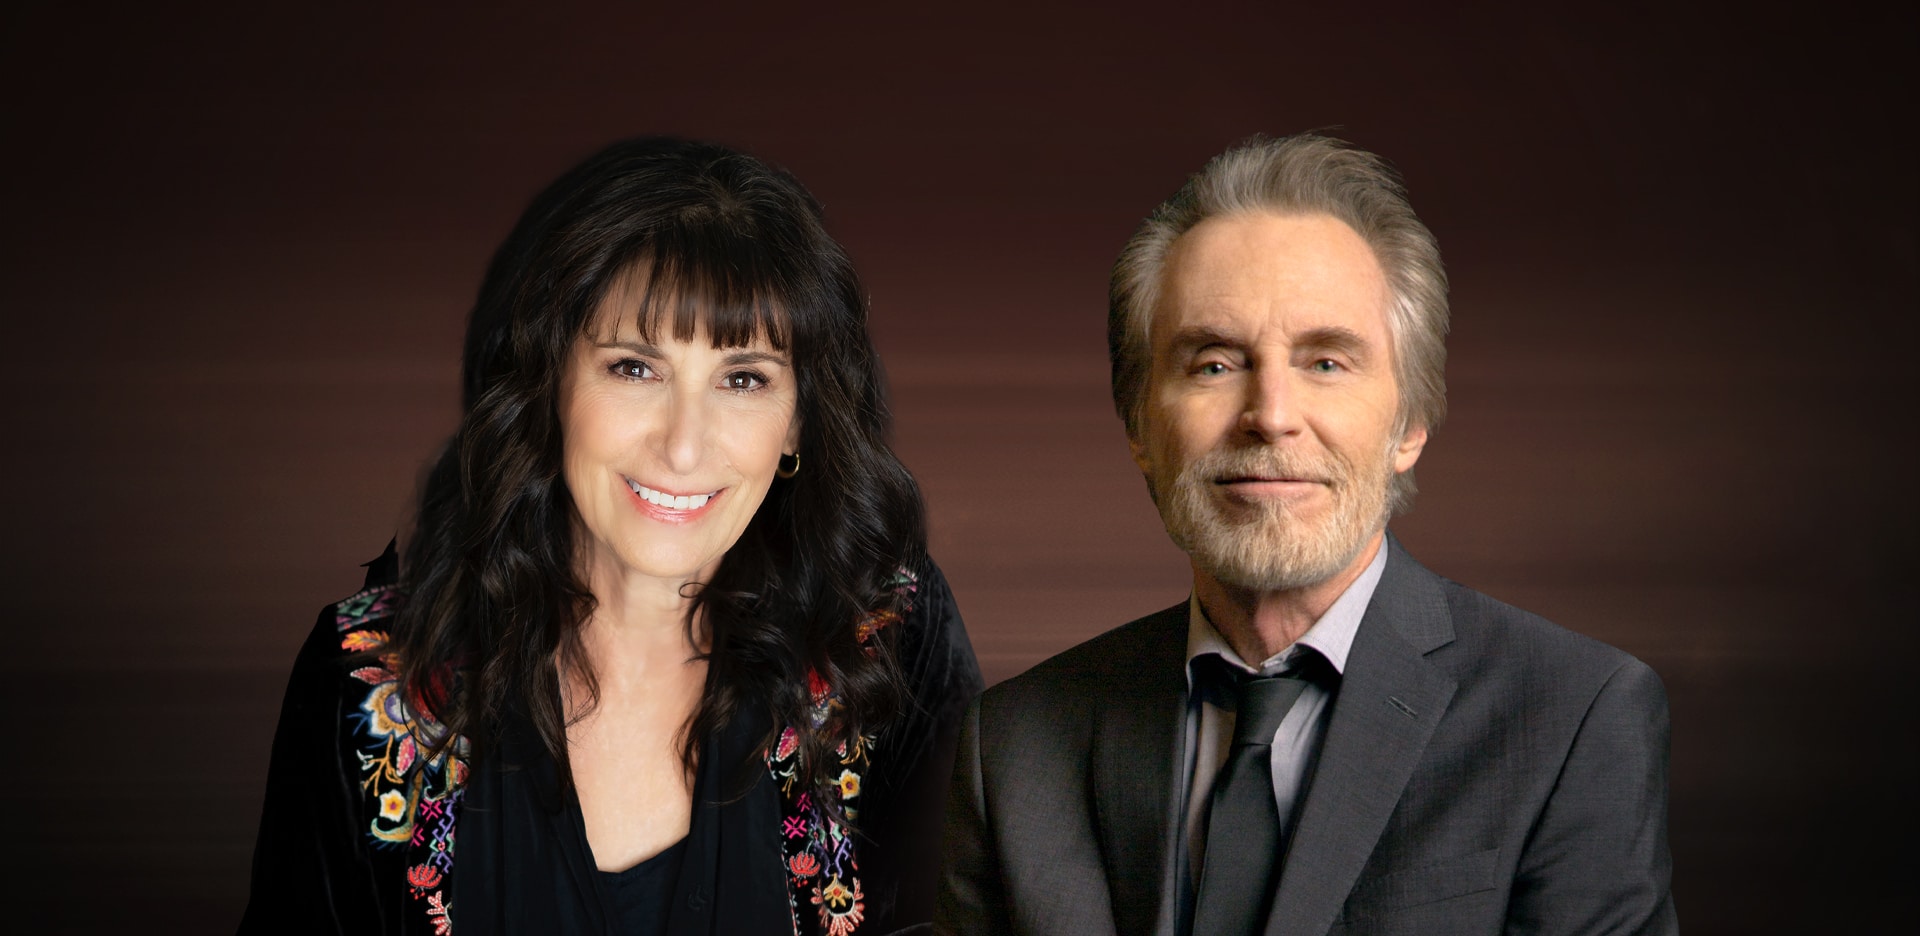 JD Souther and Karla Bonoff